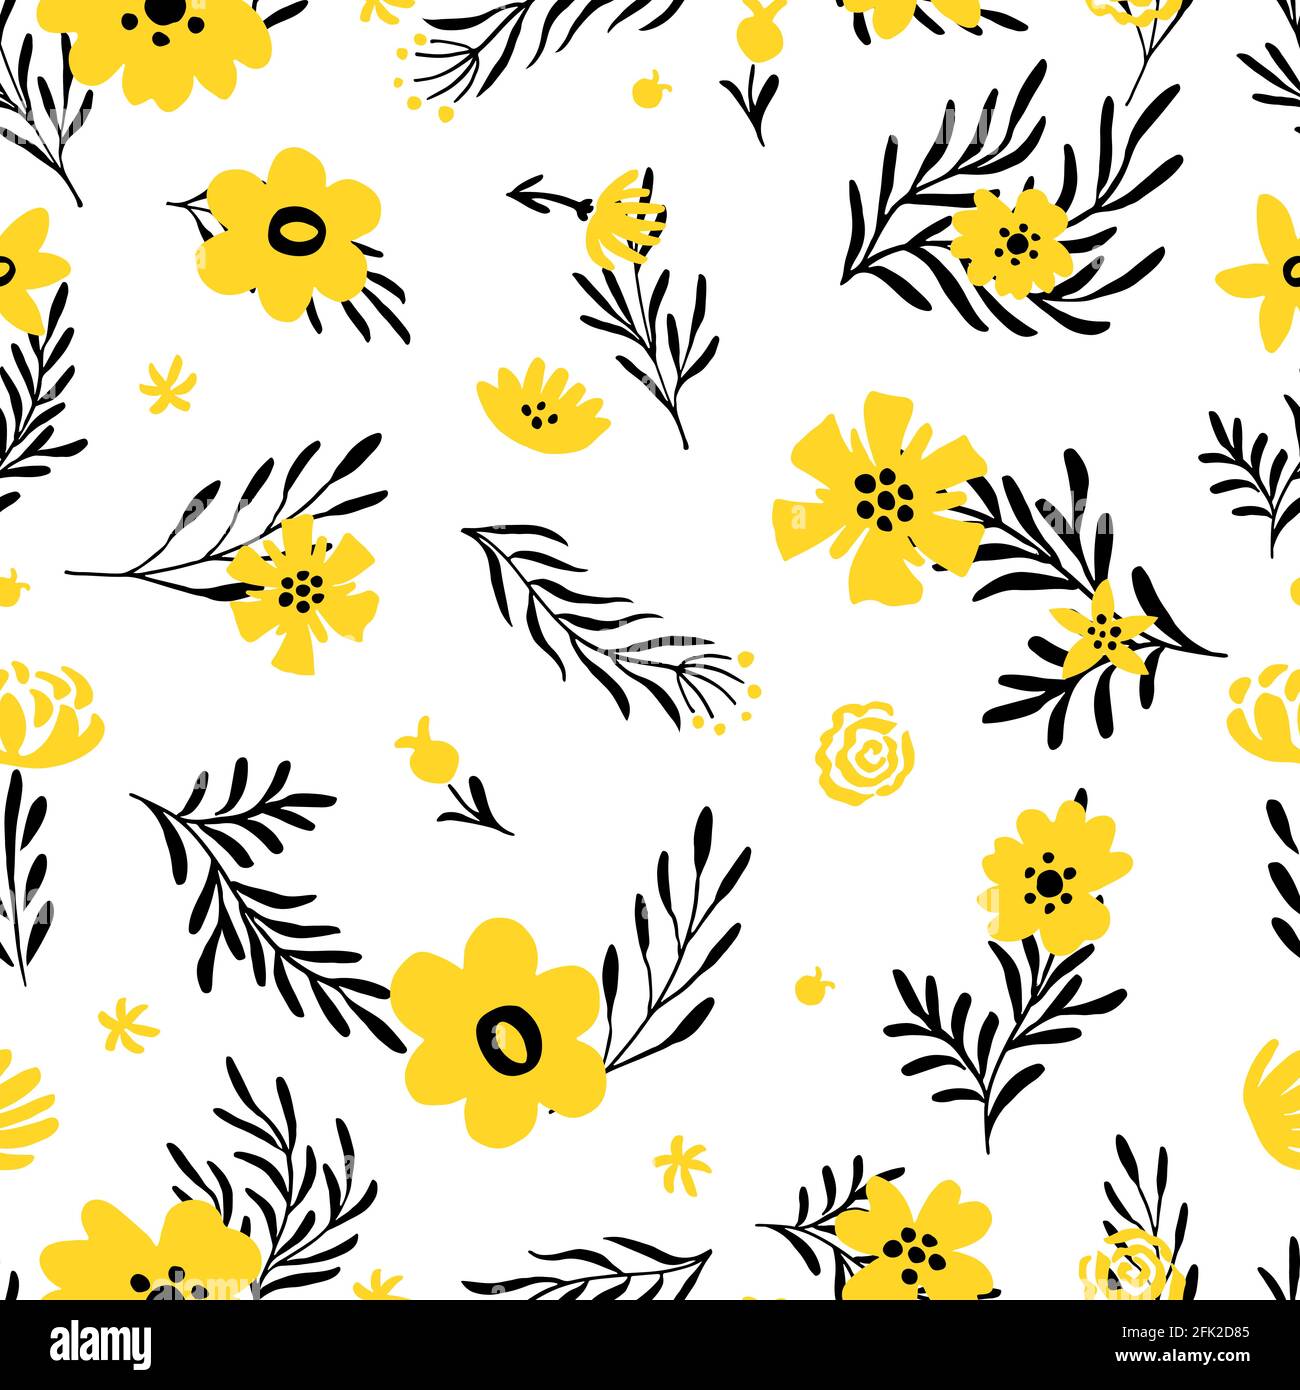 Yellow flower pattern. Doodle spring background with floral elements. Summertime fabric vector seamless texture Stock Vector